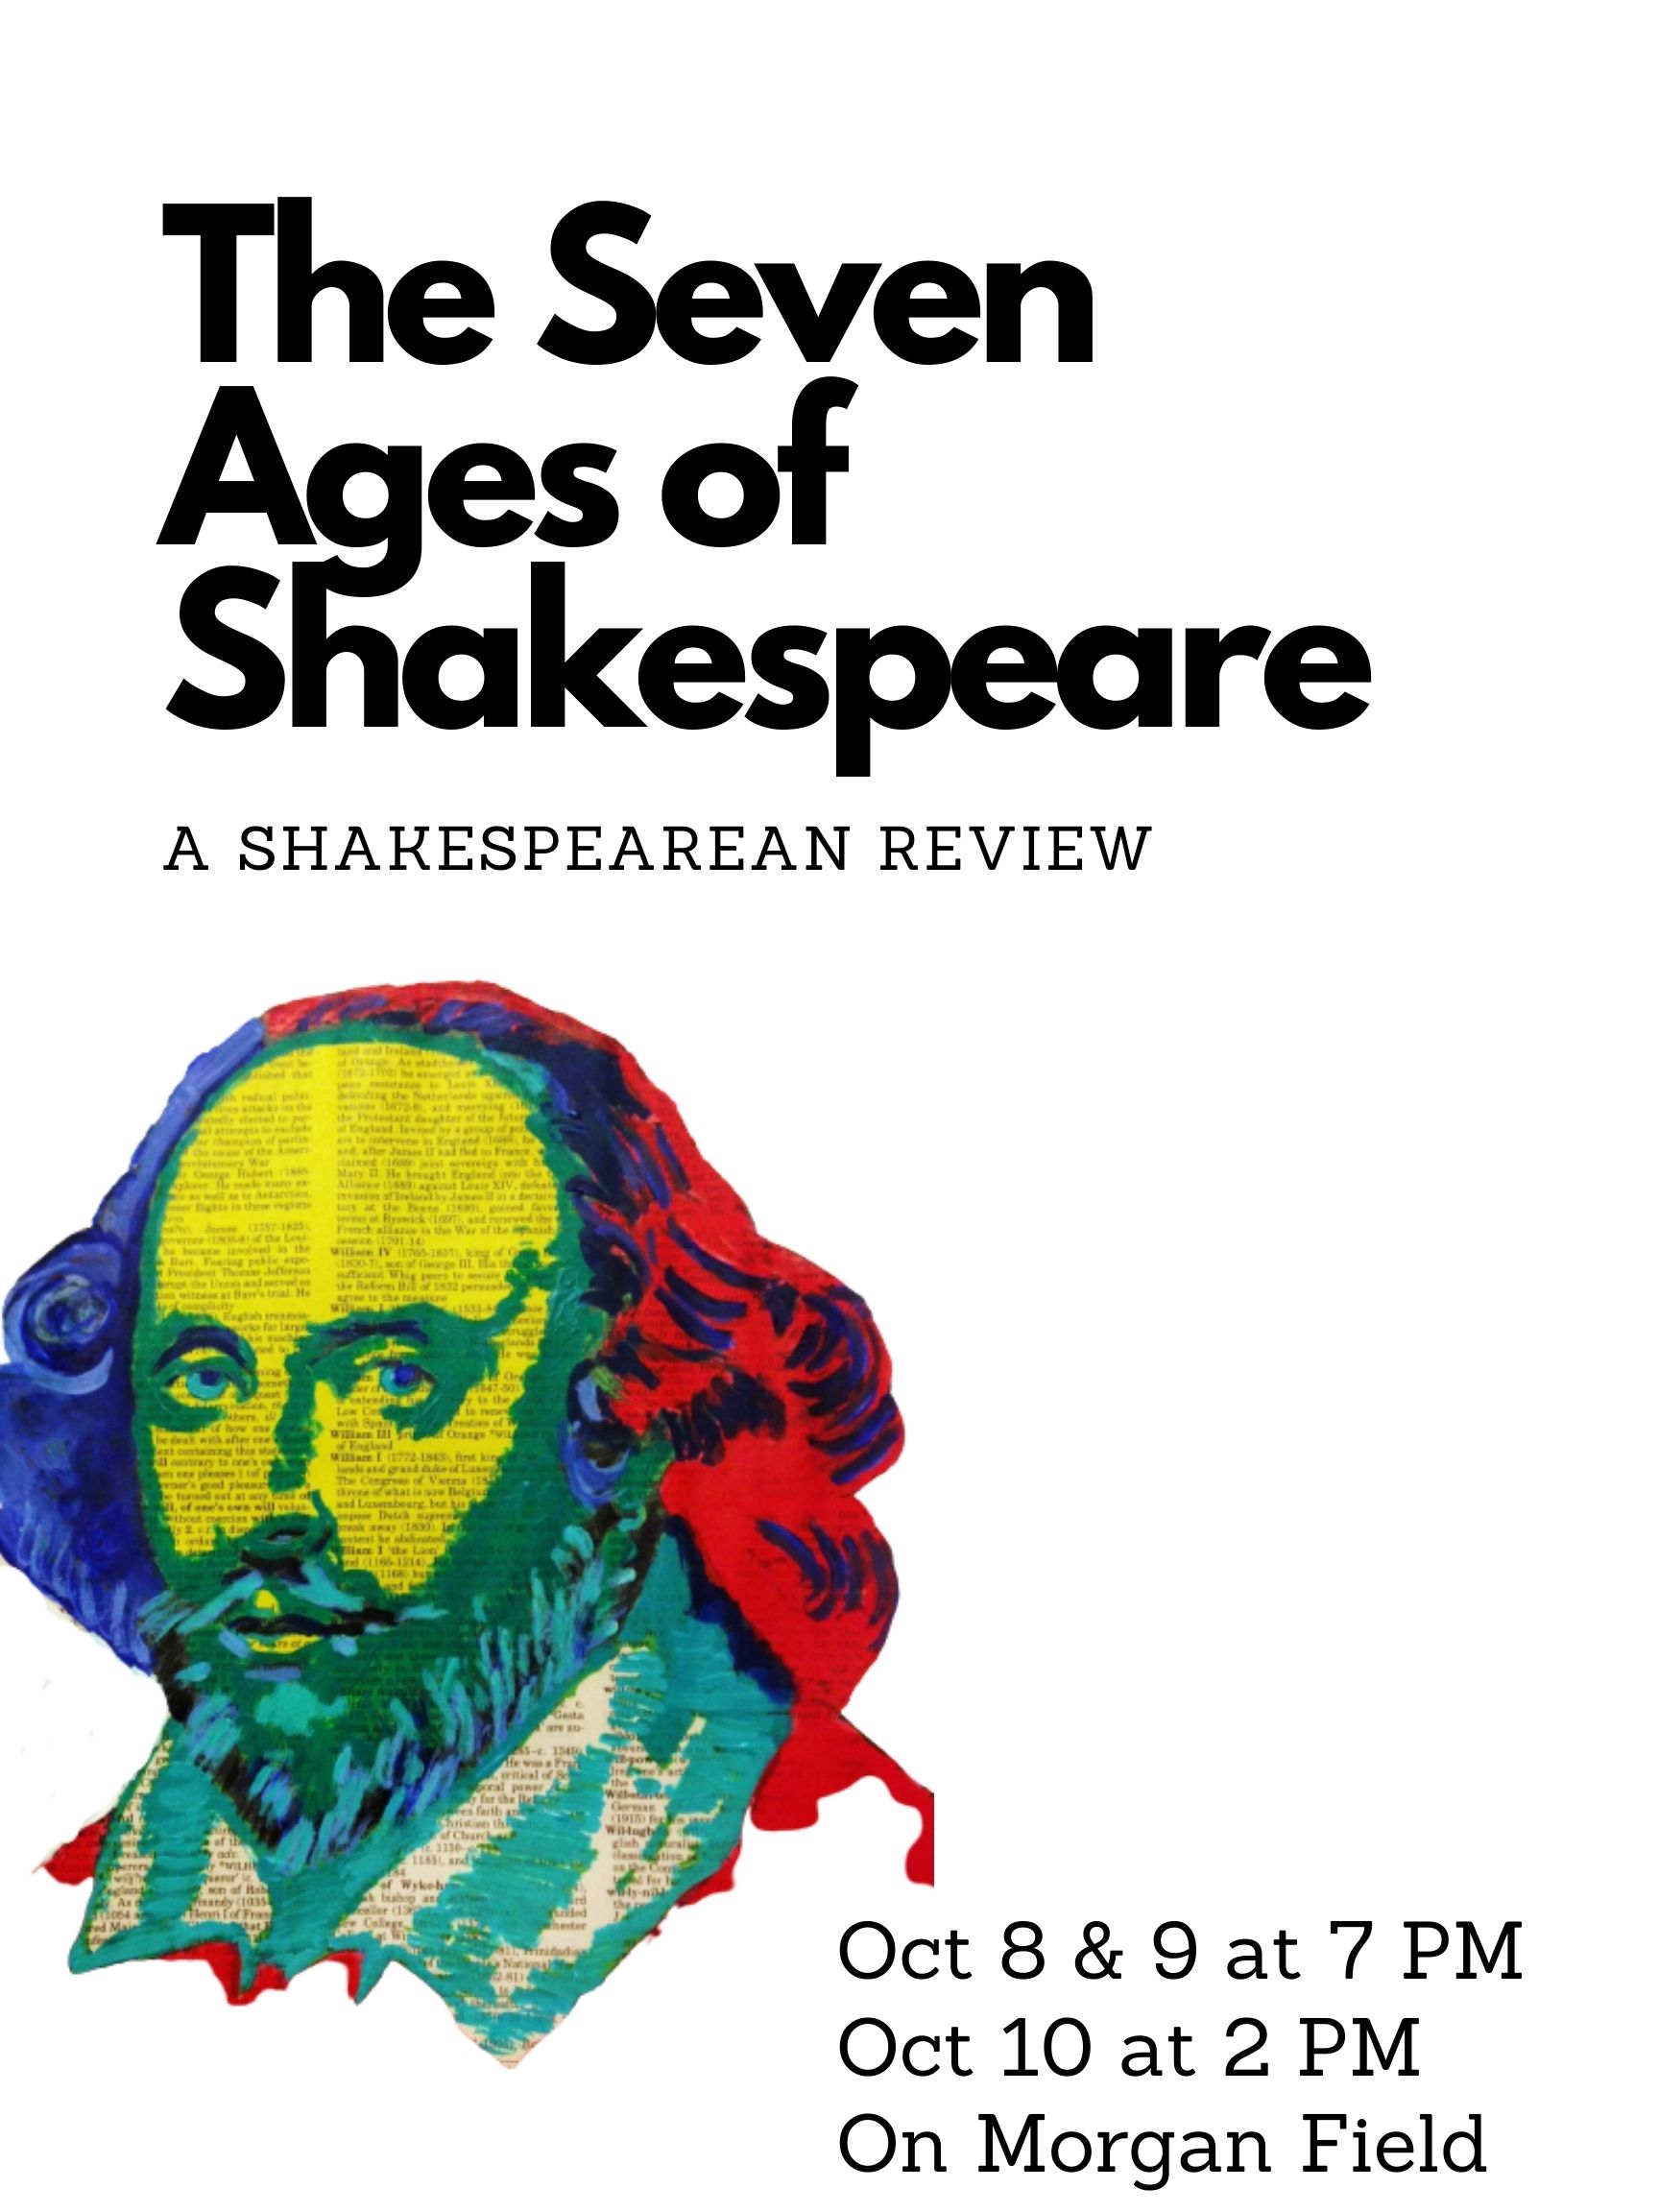 the seven ages of shakespeare graphic